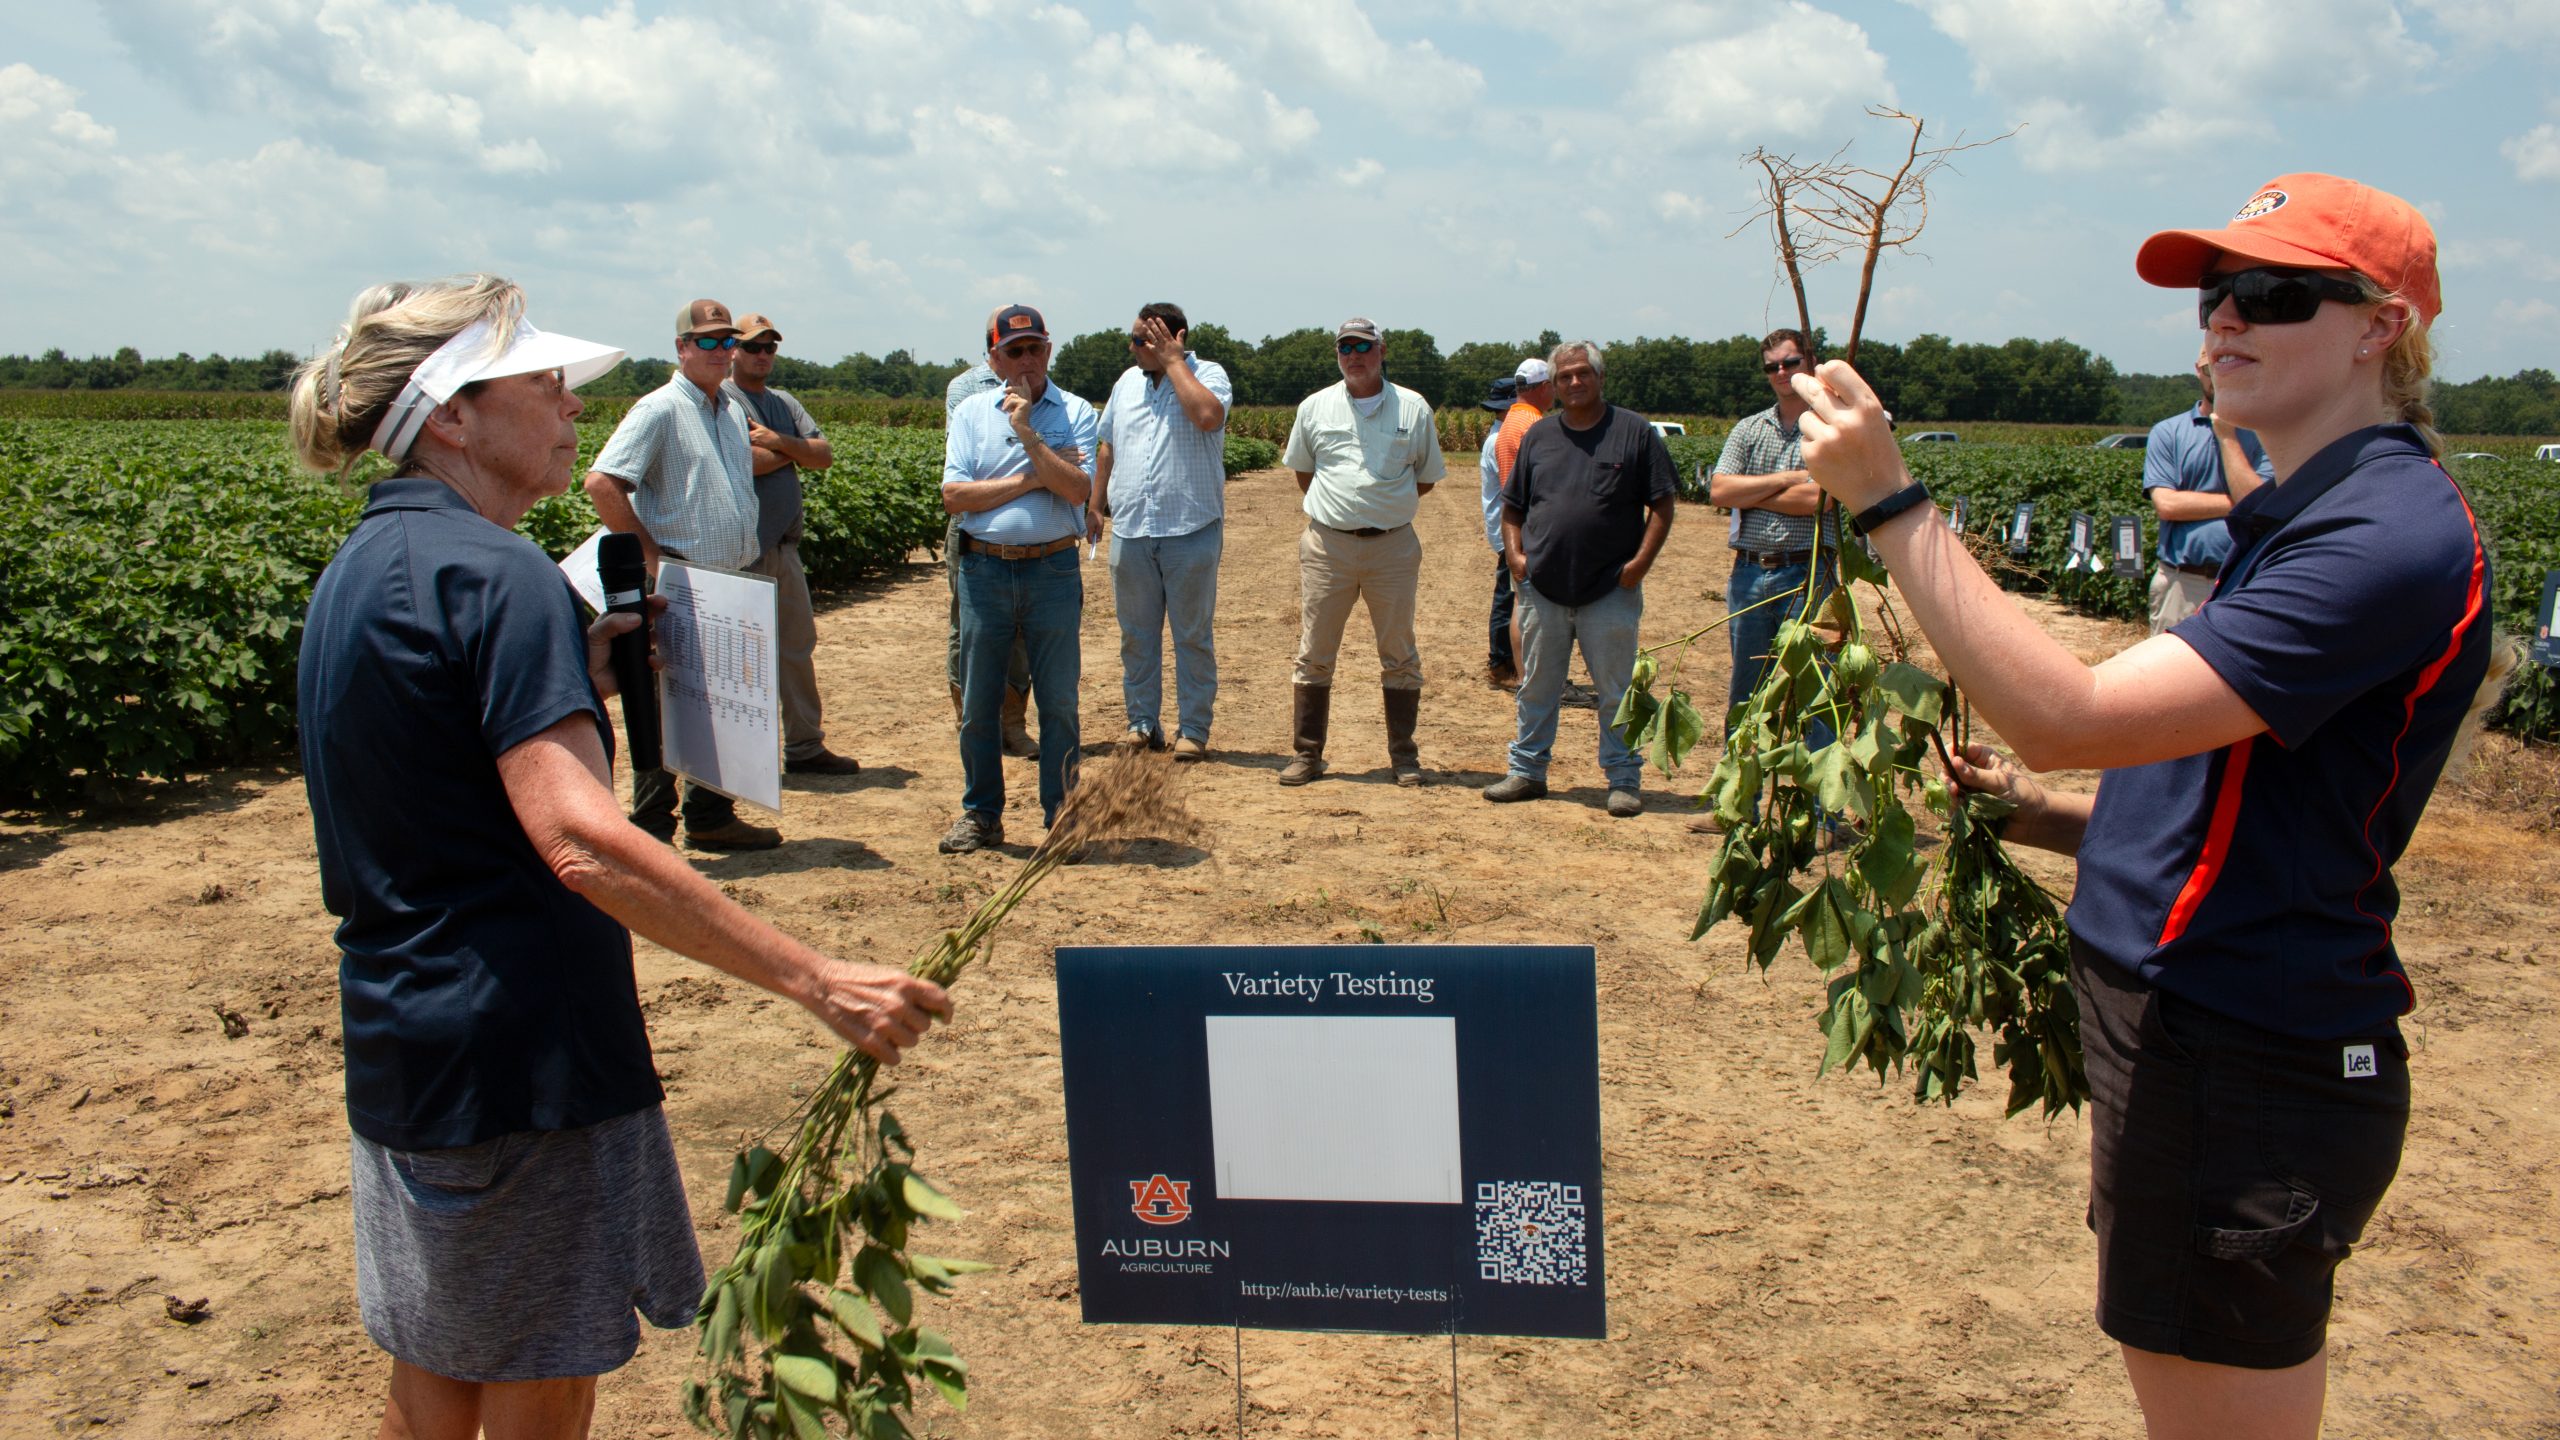 Kathy Lawrence, left, professor in the Department of Entomology and Plant Pathology and researcher with the Alabama Agricultural Experiment Station, is shown describing research to minimize nematode damage at the E.V. Smith Research Center in Shorter. Shown with Lawrence is Auburn graduate student Claire Schloemer.